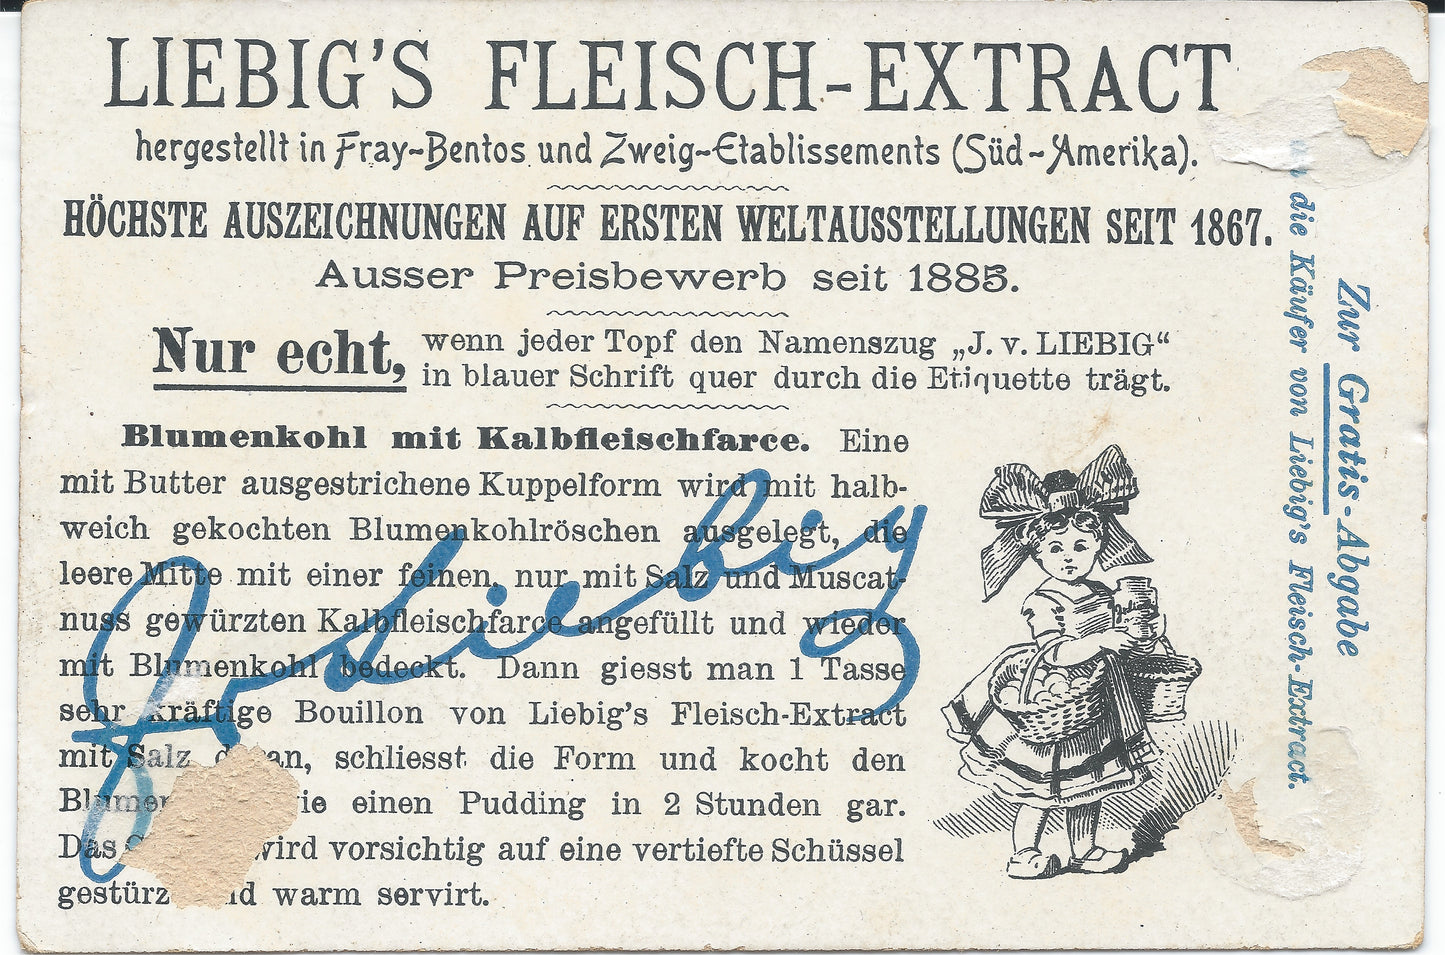 Liebig meat extract